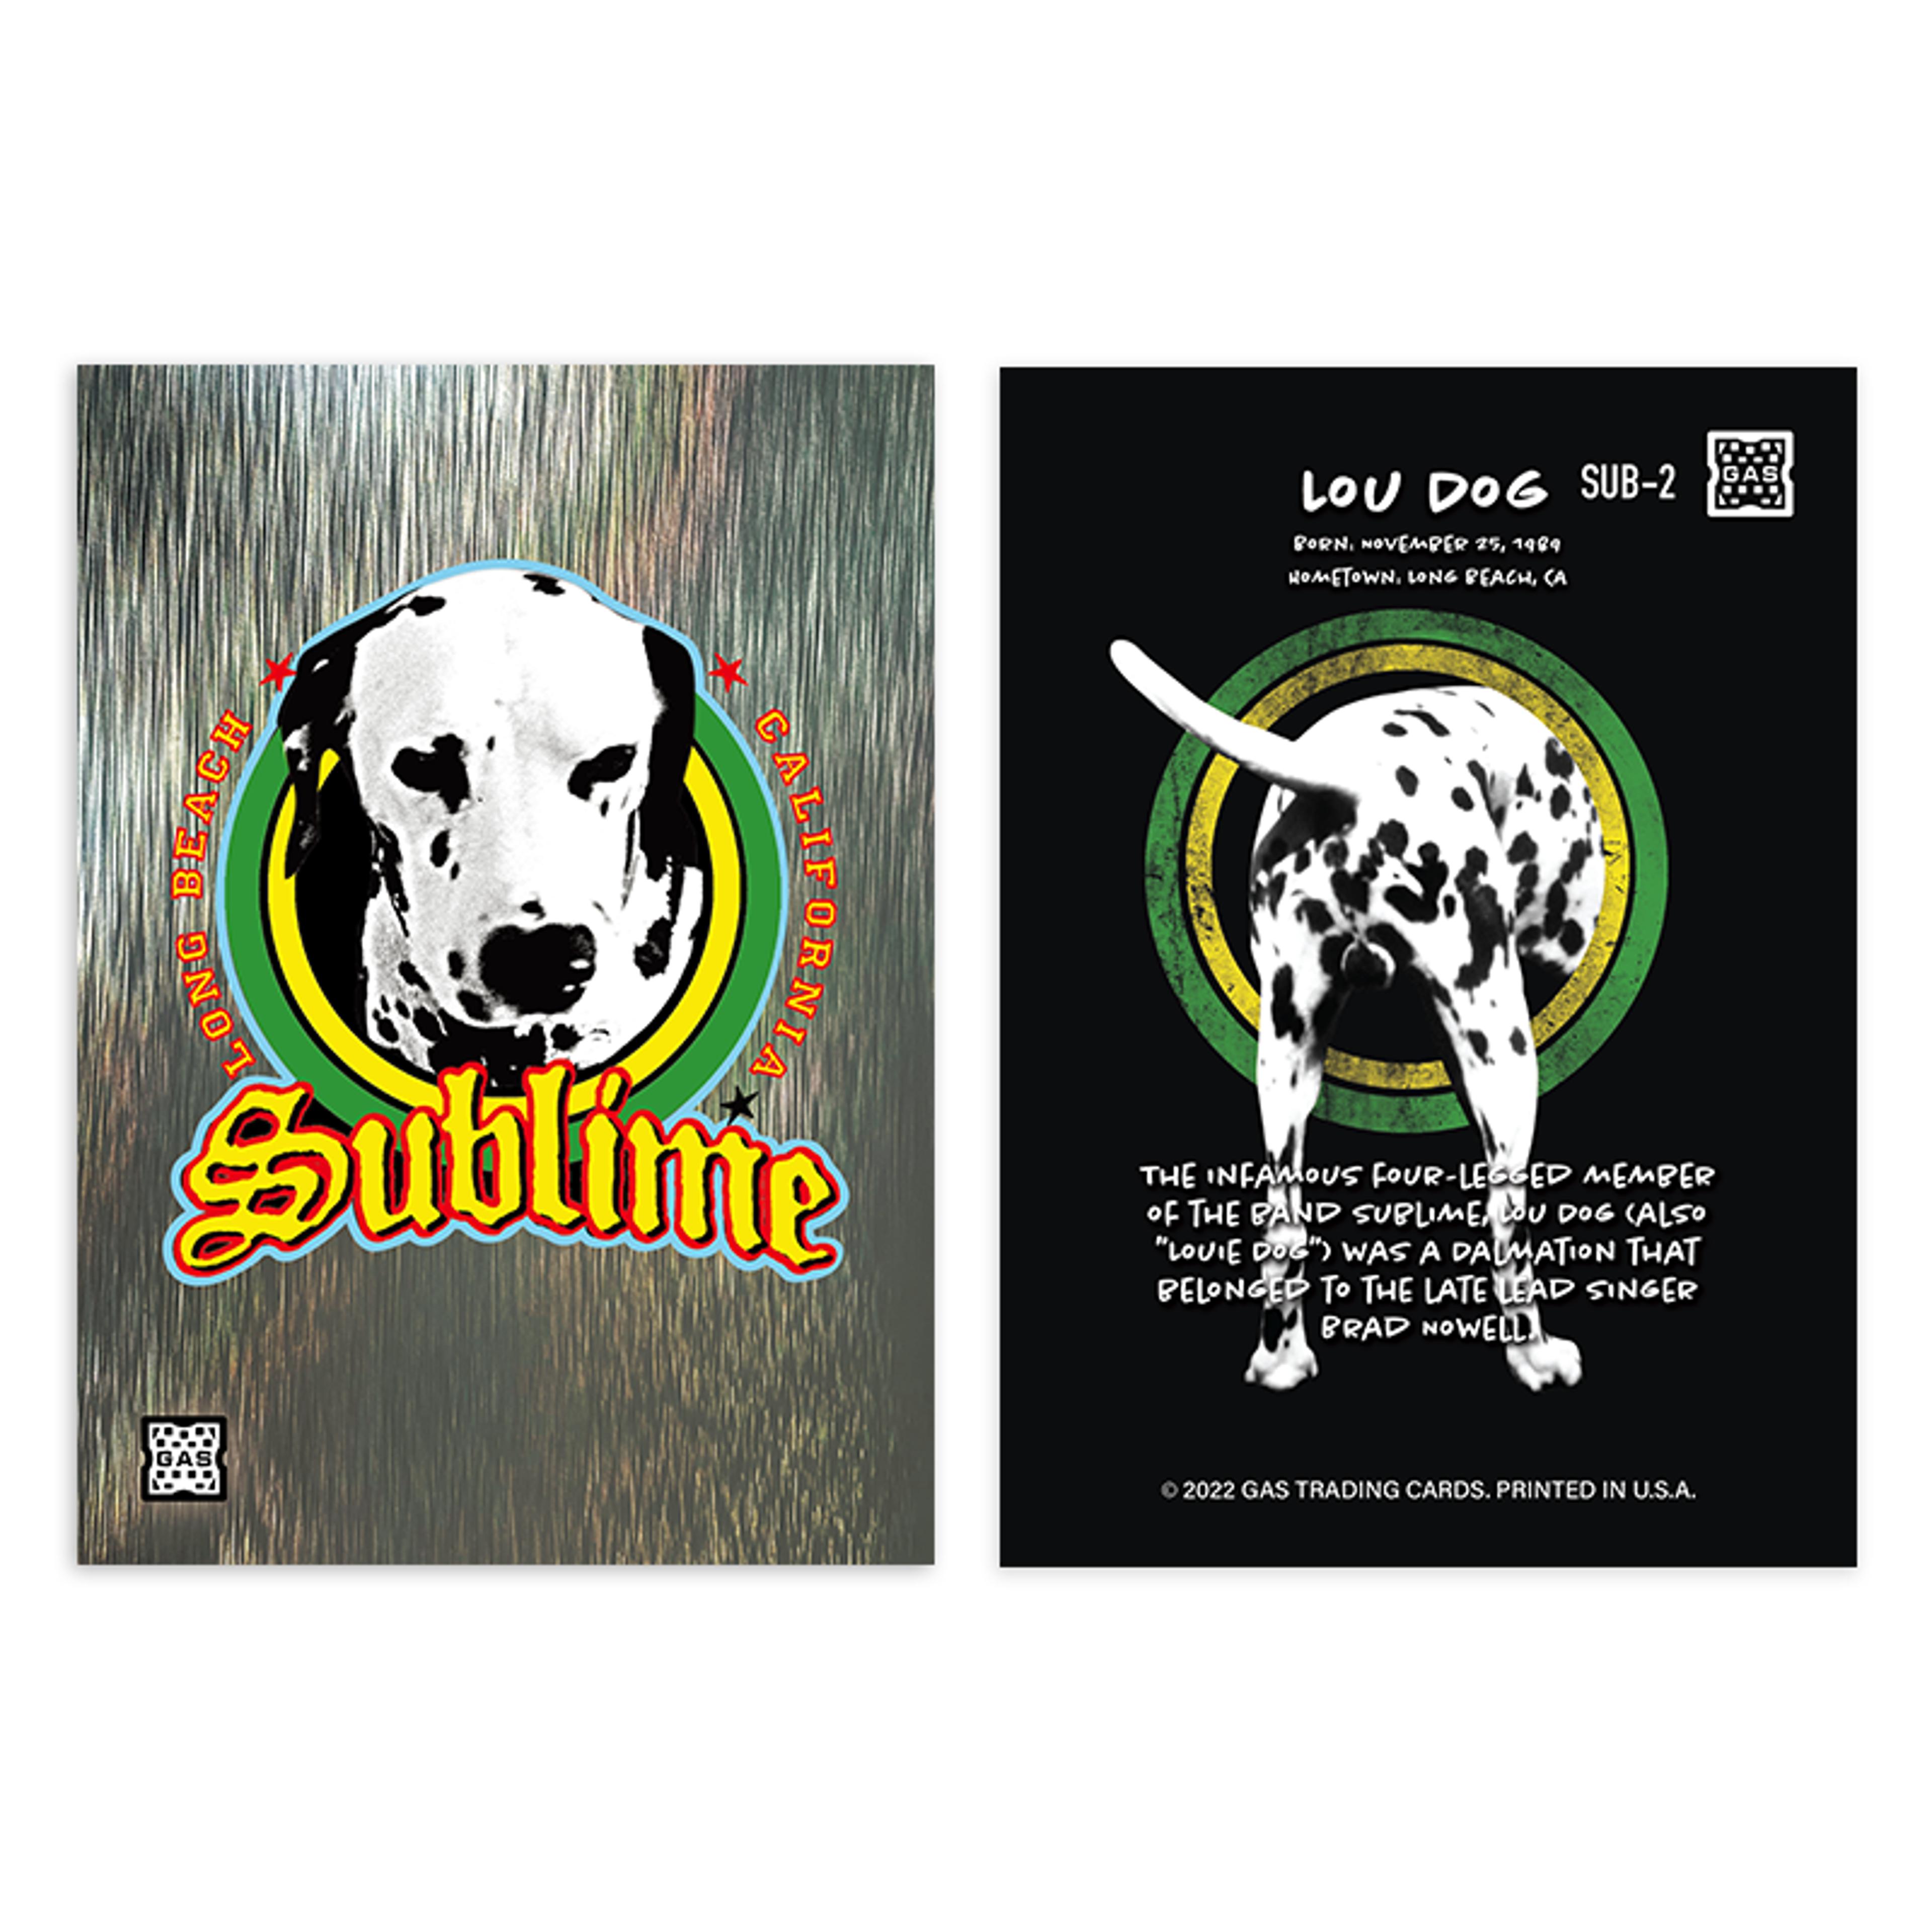 Alternate View 2 of The Official Sublime GAS Trading Card #2 Lou Dog